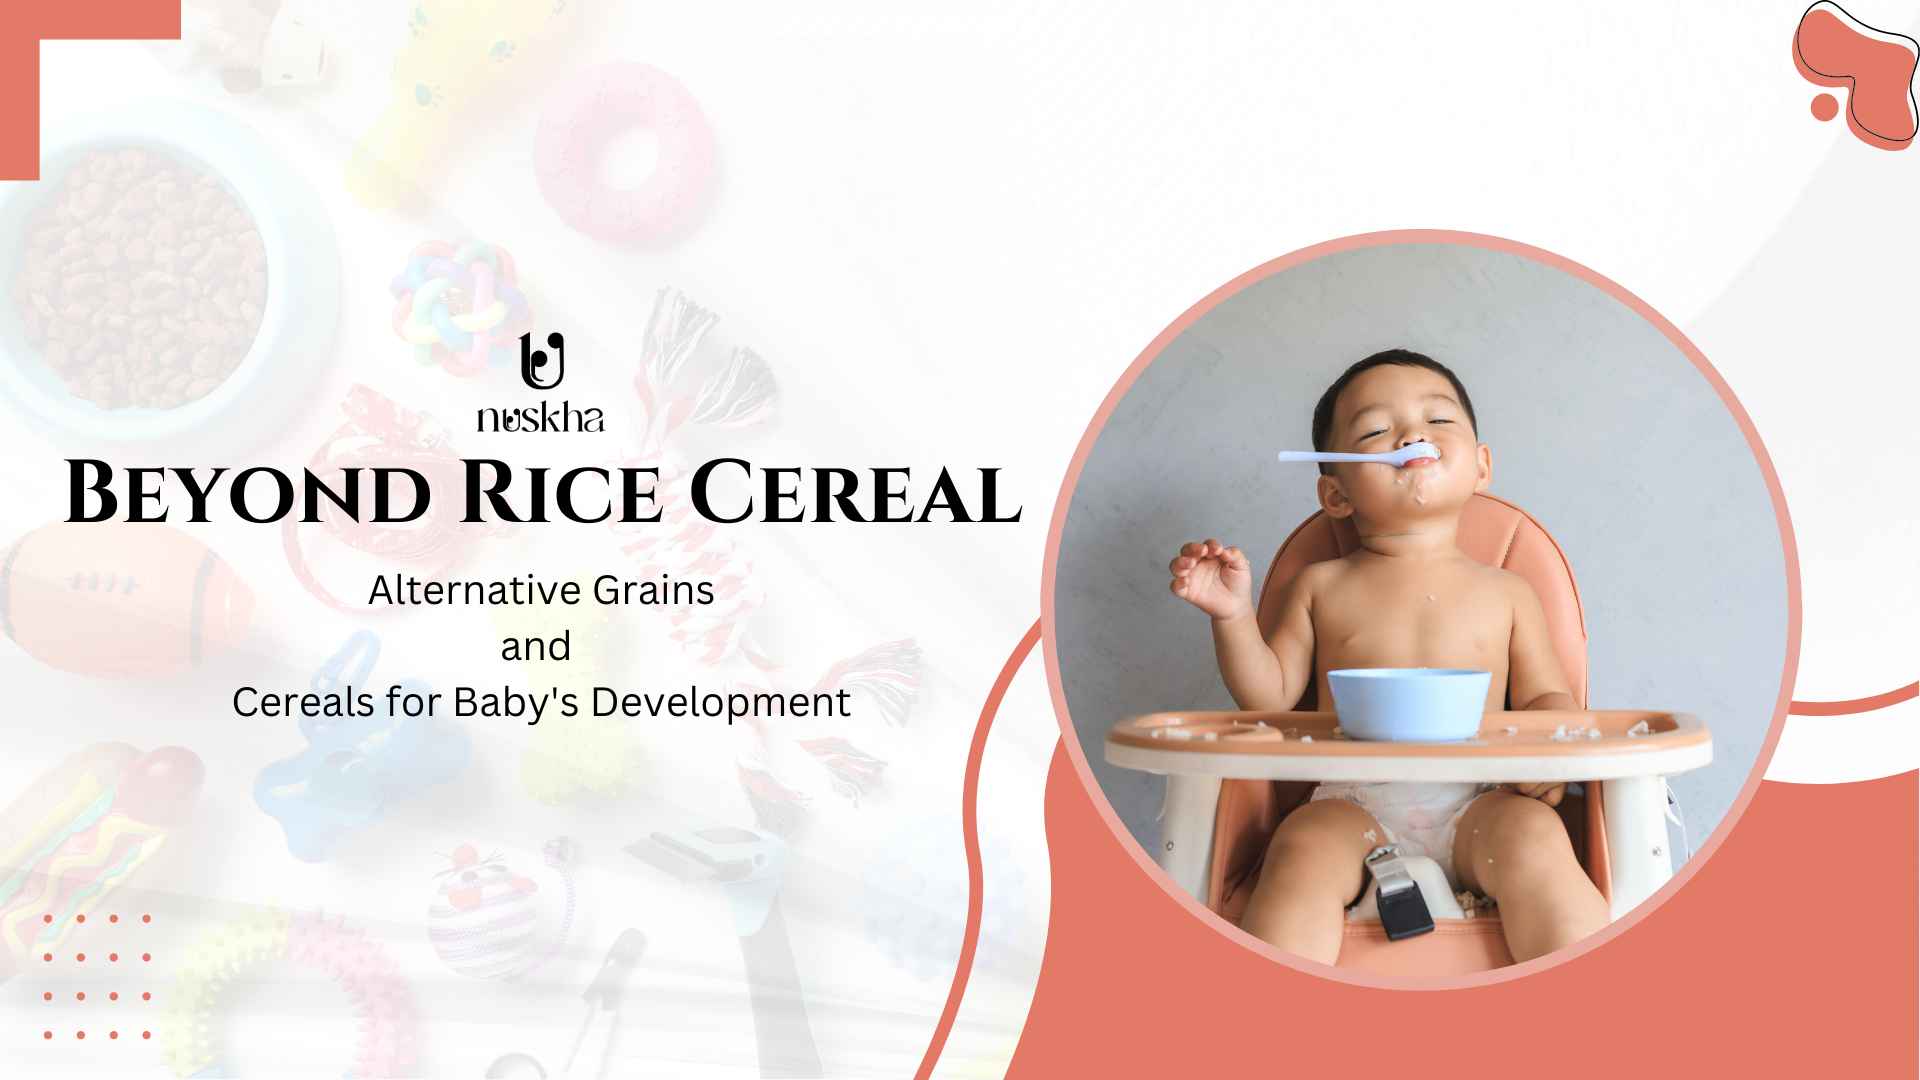 Beyond Rice Cereal: Alternative Grains and Cereals for Baby's Development